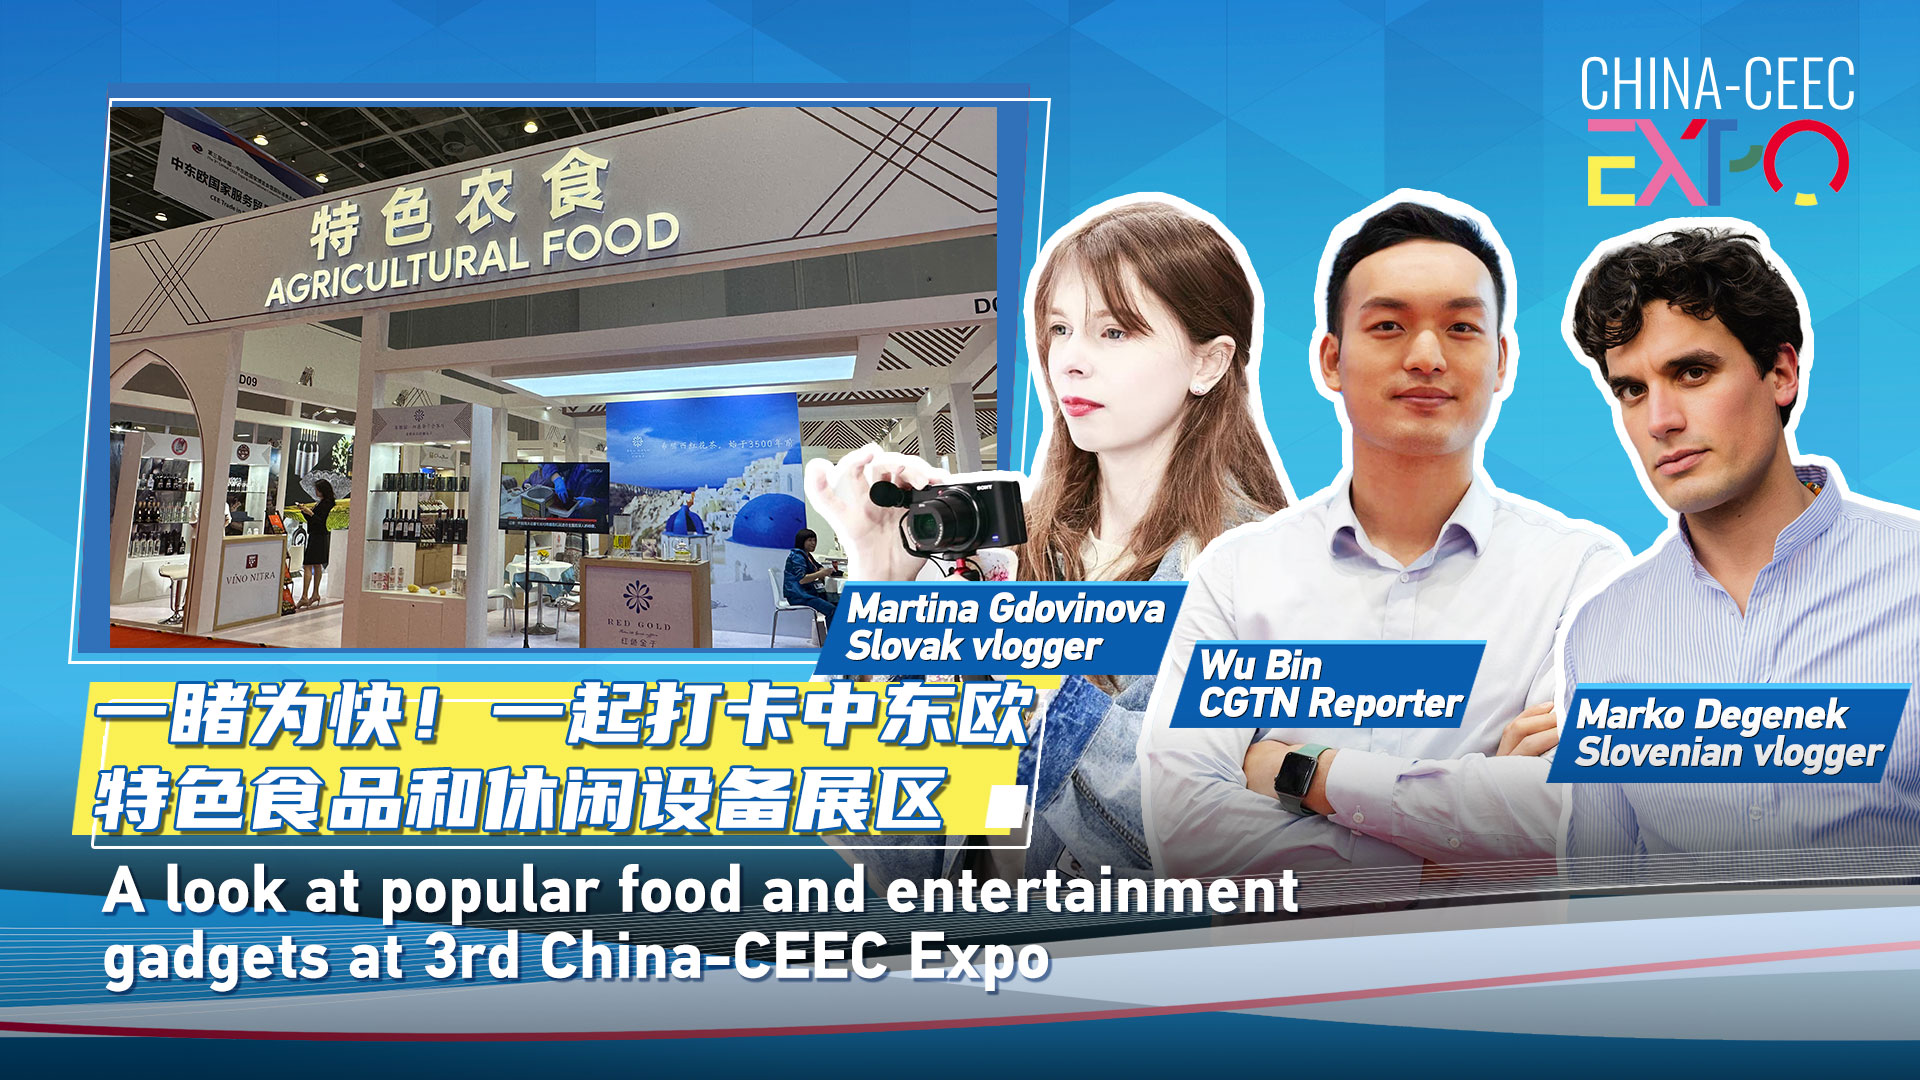 Live: A look at popular food and entertainment gadgets at 3rd China-CEEC Expo